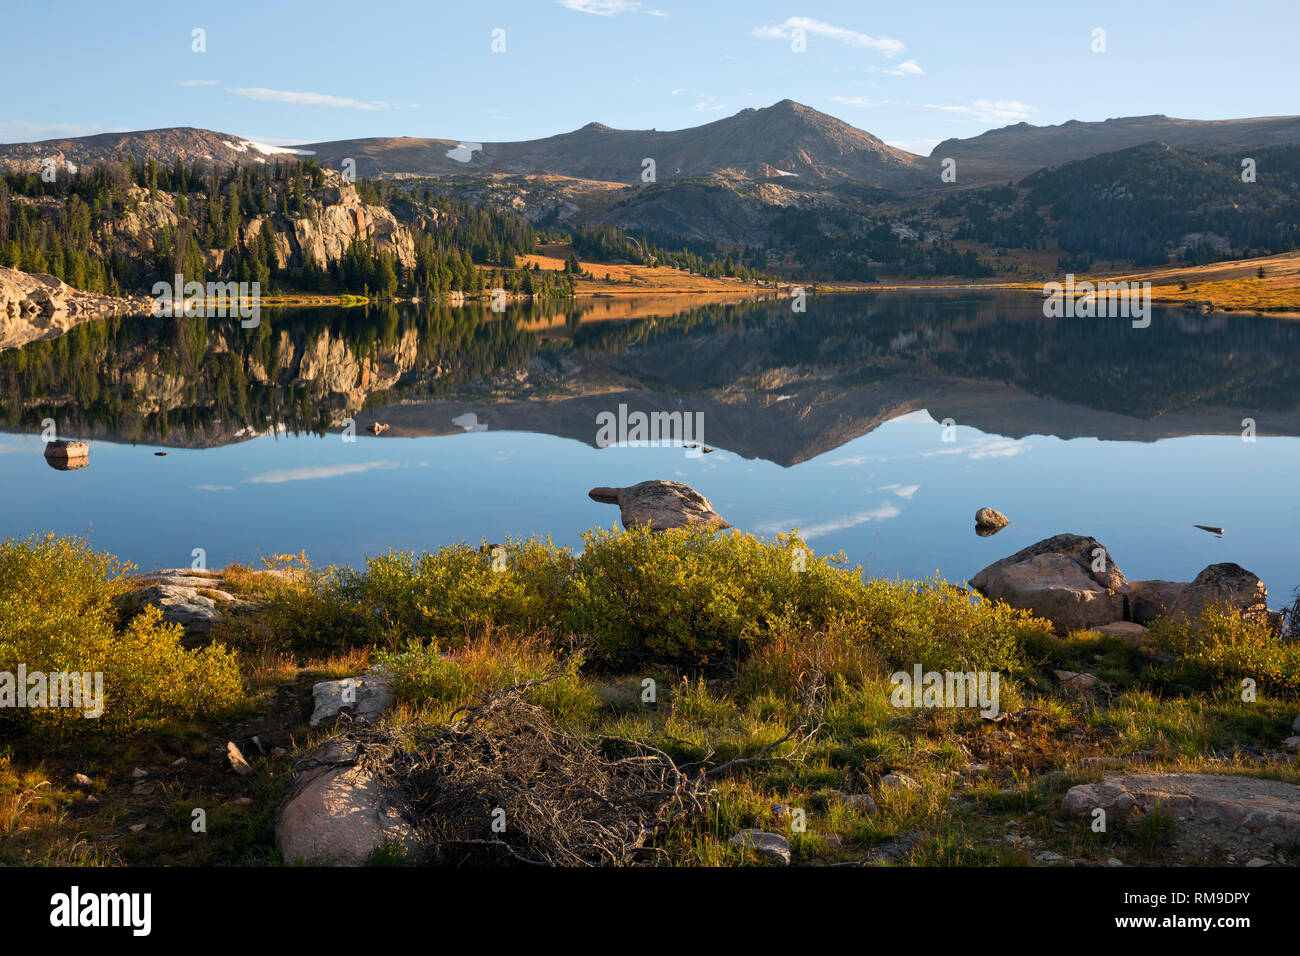 WY03719-00...WYOMING - The Beartooth Mountains reflecting in Long Lake located along the Beartooth Highway in the Shoshone National Forest. Stock Photo